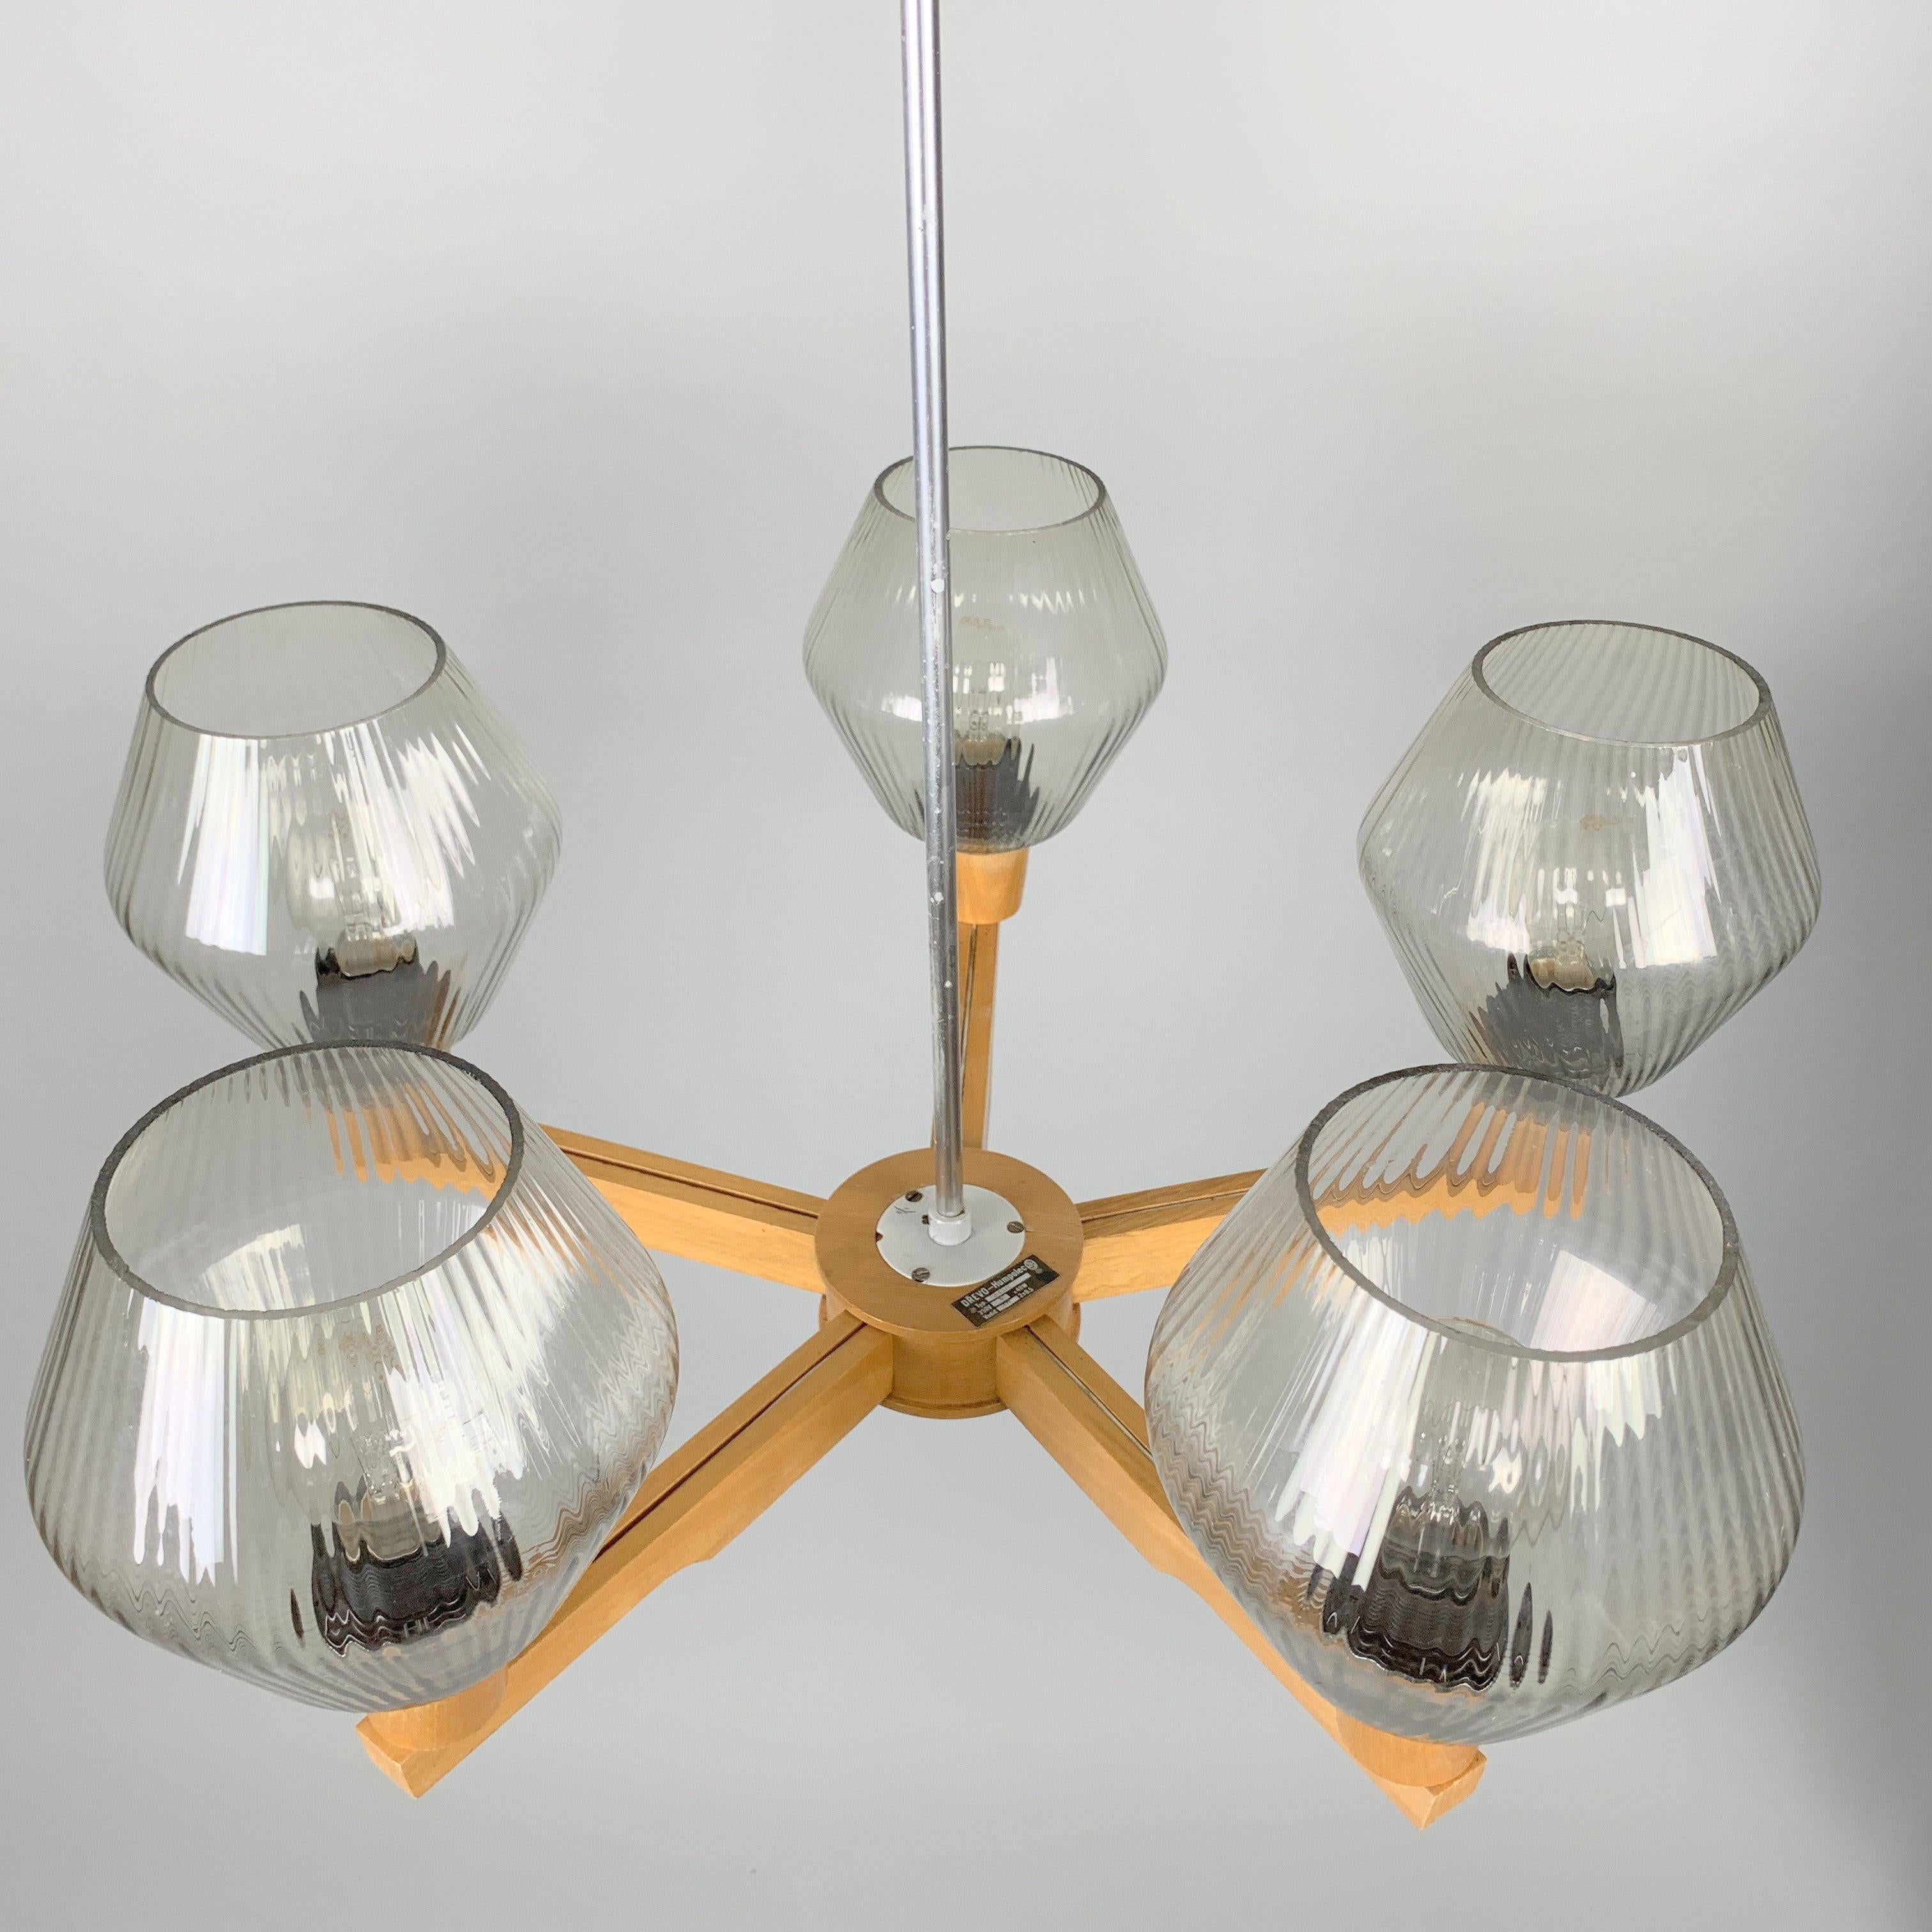 Vintage chandelier made by Drevo Humpolec in former Czechoslovakia in the 1970s. Good original condition. Bulbs: 5 x E27 or E26.